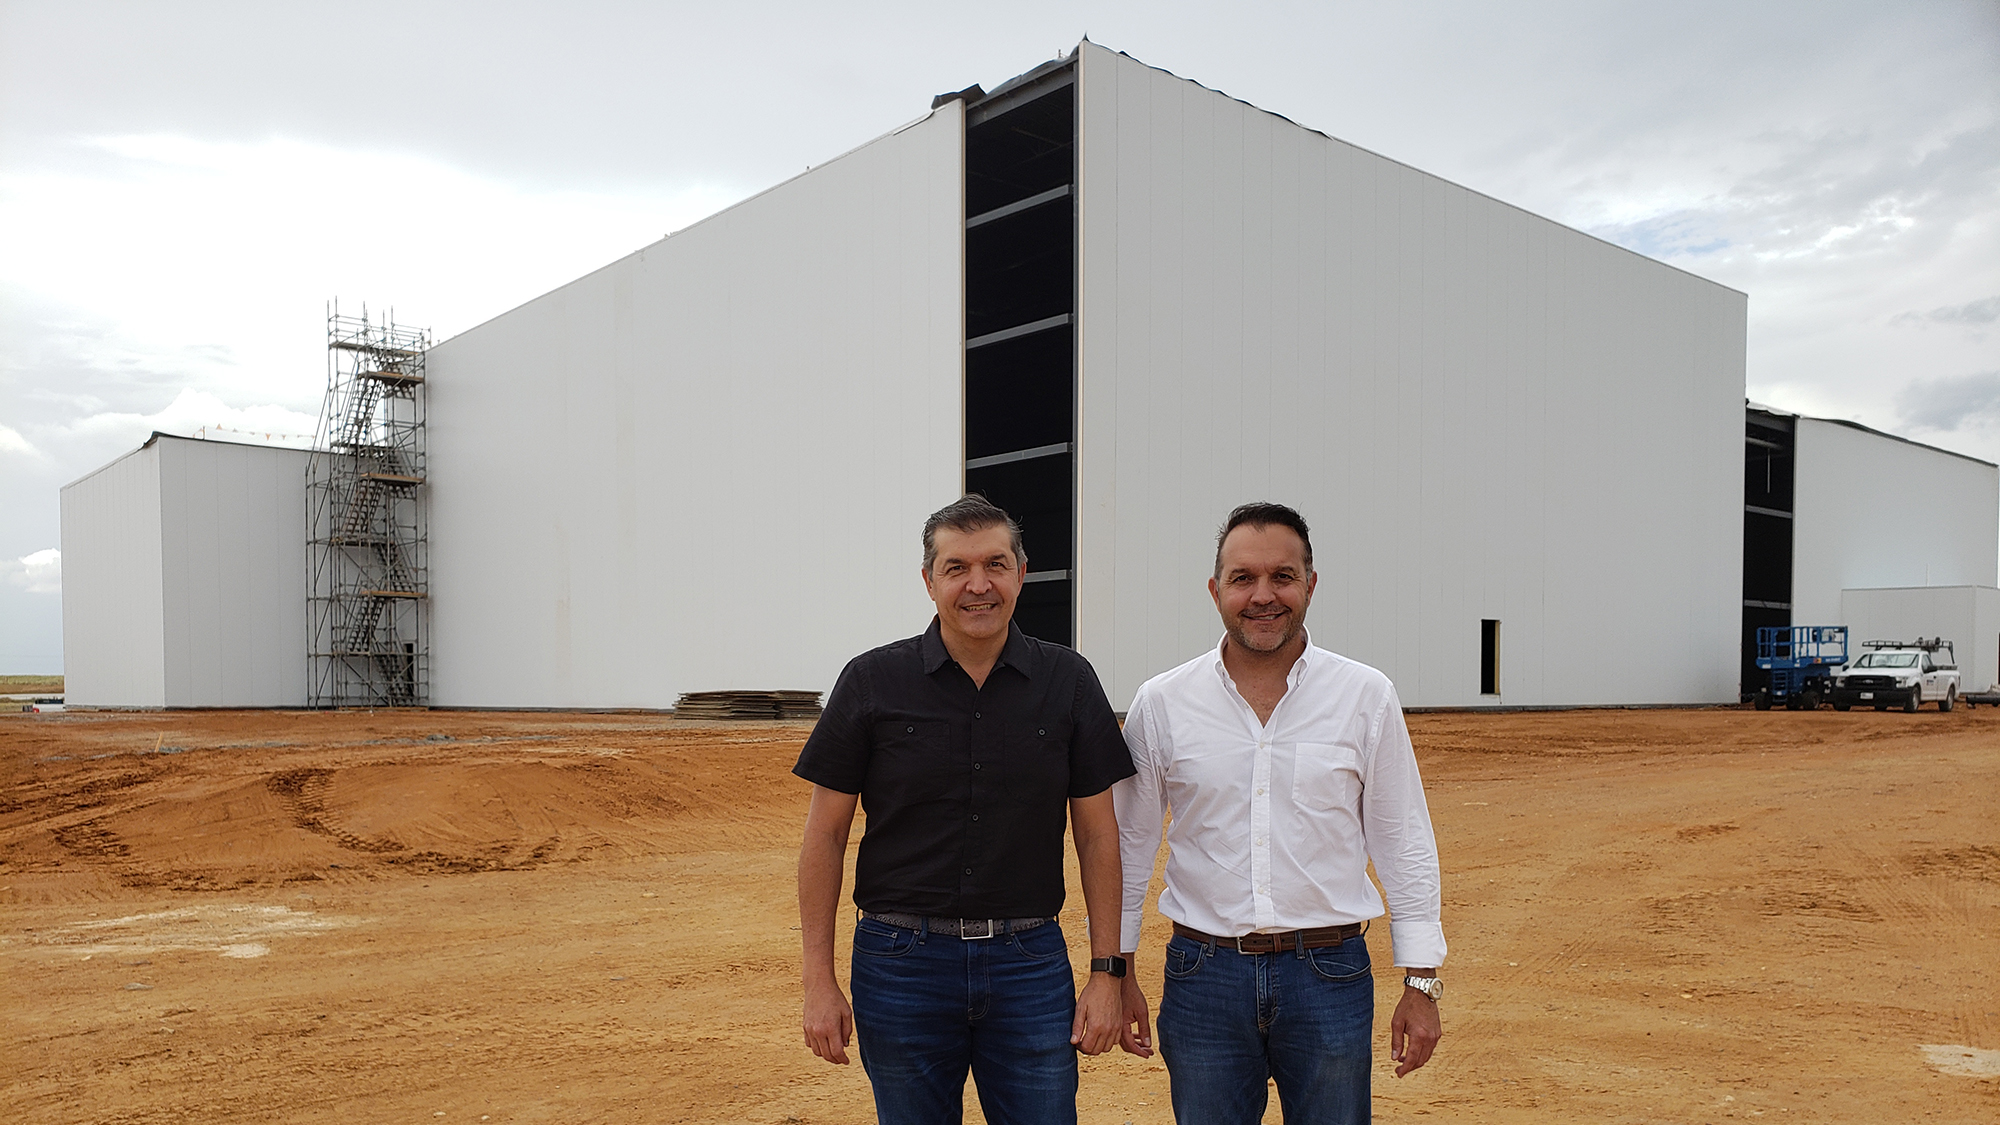 Jaime Usabiaga and Miguel Usabiaga, president and vice president, respectively, of international produce distributor GAB Operations, LLC. Facility renovation or new construction?